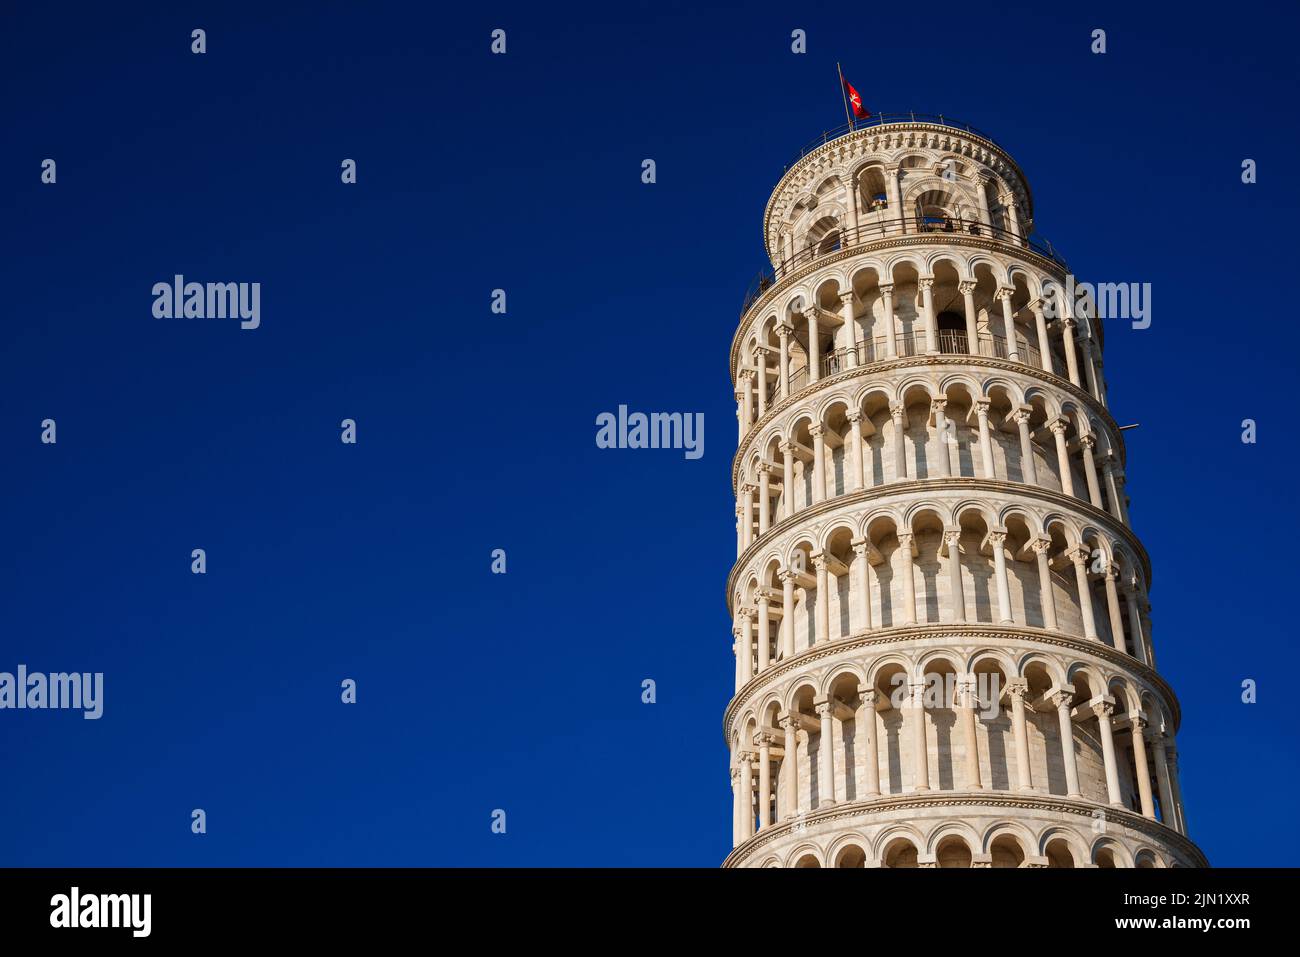 The iconic Leaning Tower of Pisa, one of the most famous ancient building in the world (with blue sky and copy space) Stock Photo